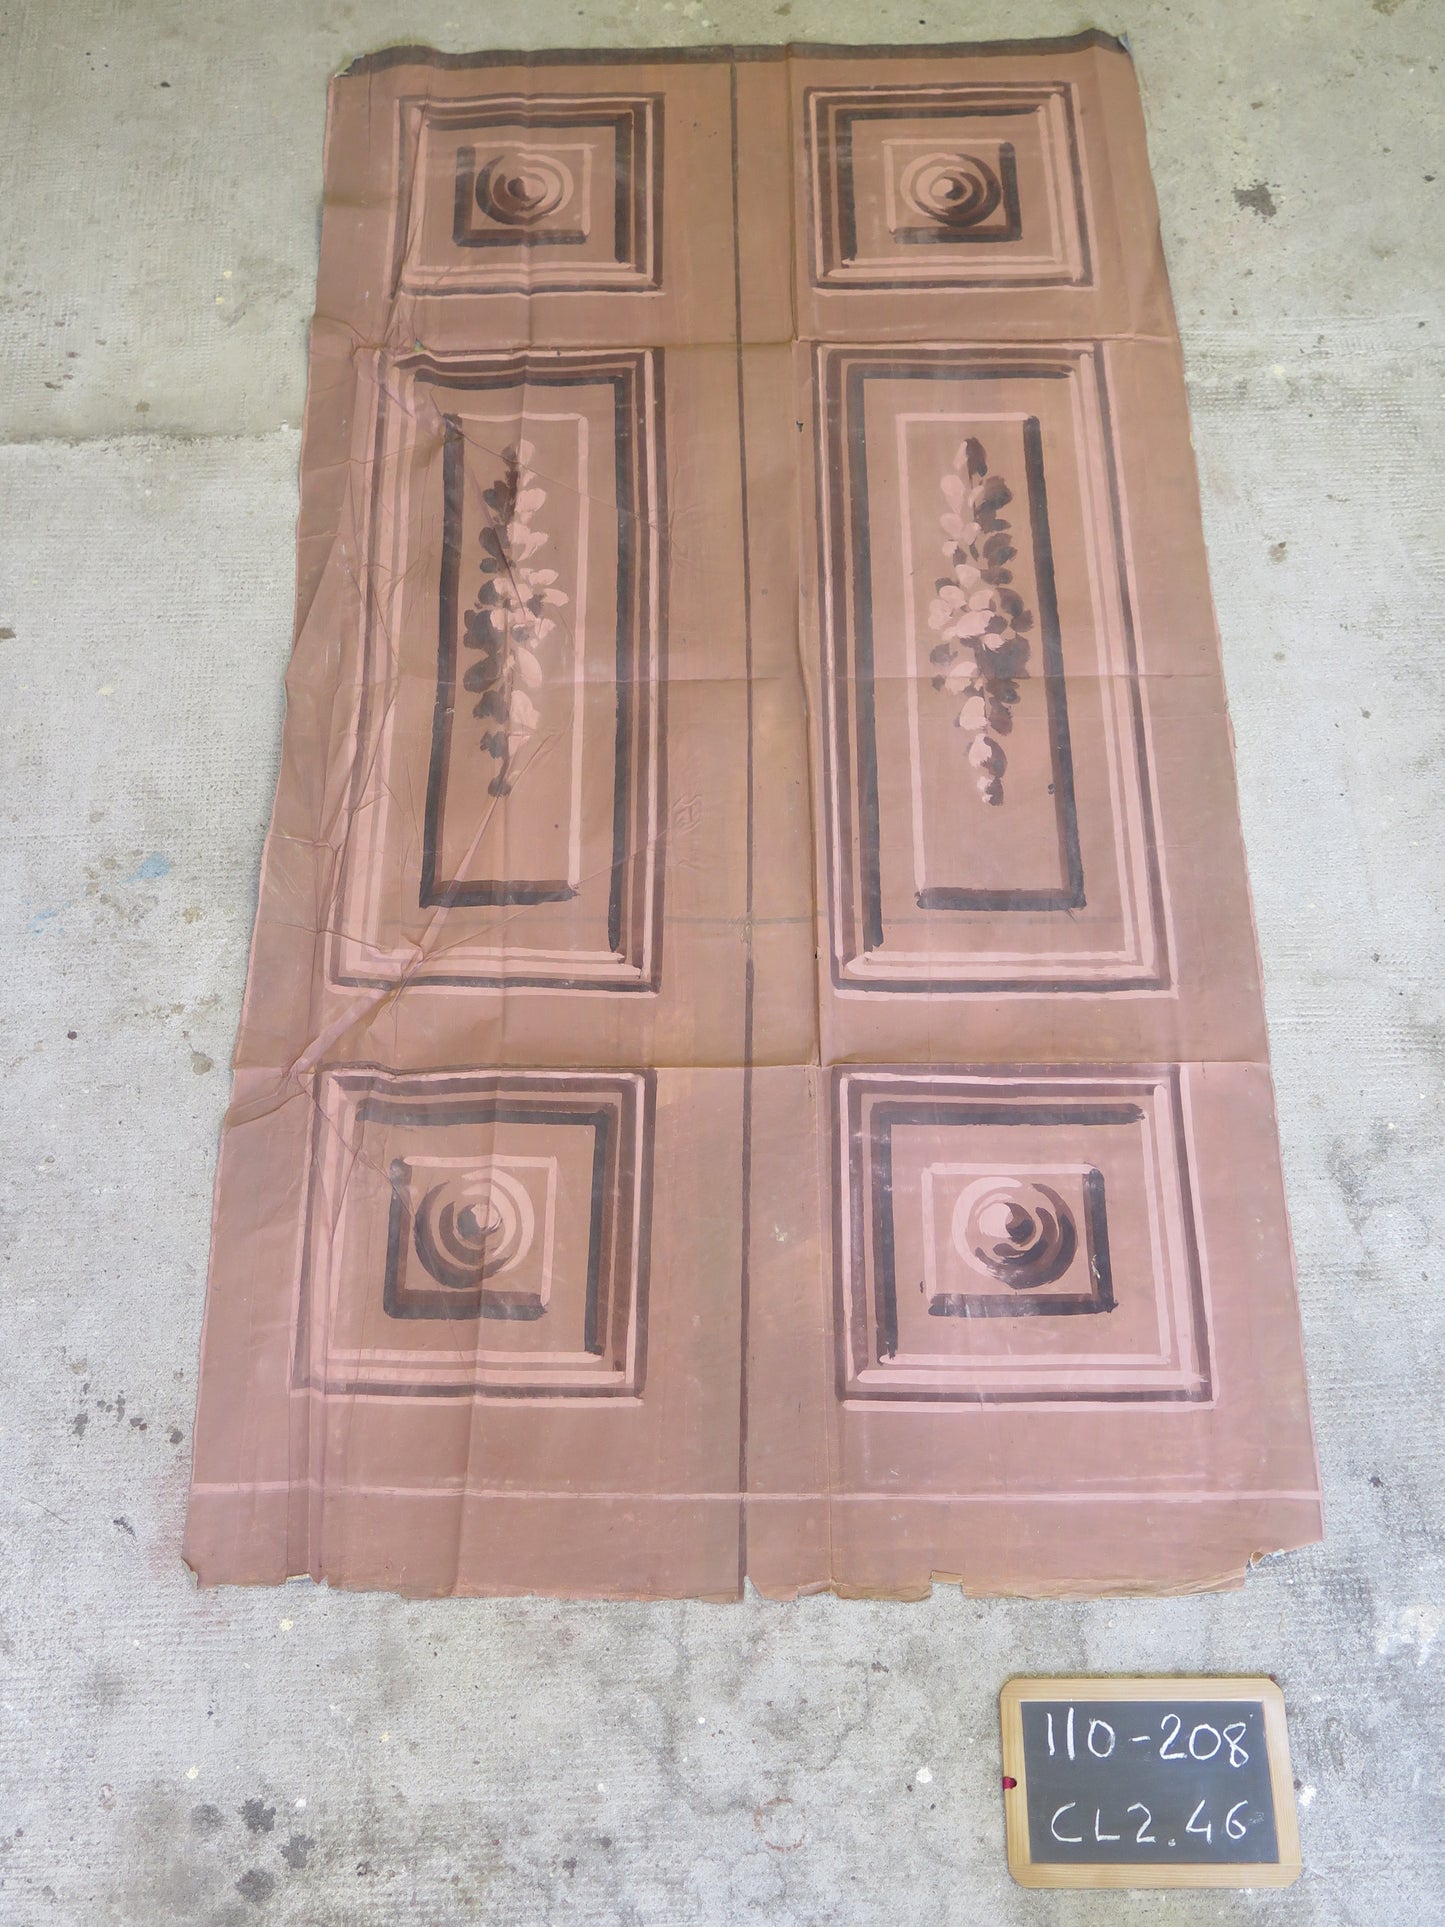 110x208 cm ancient scenography theater backdrop hand painted wooden door cl2.46